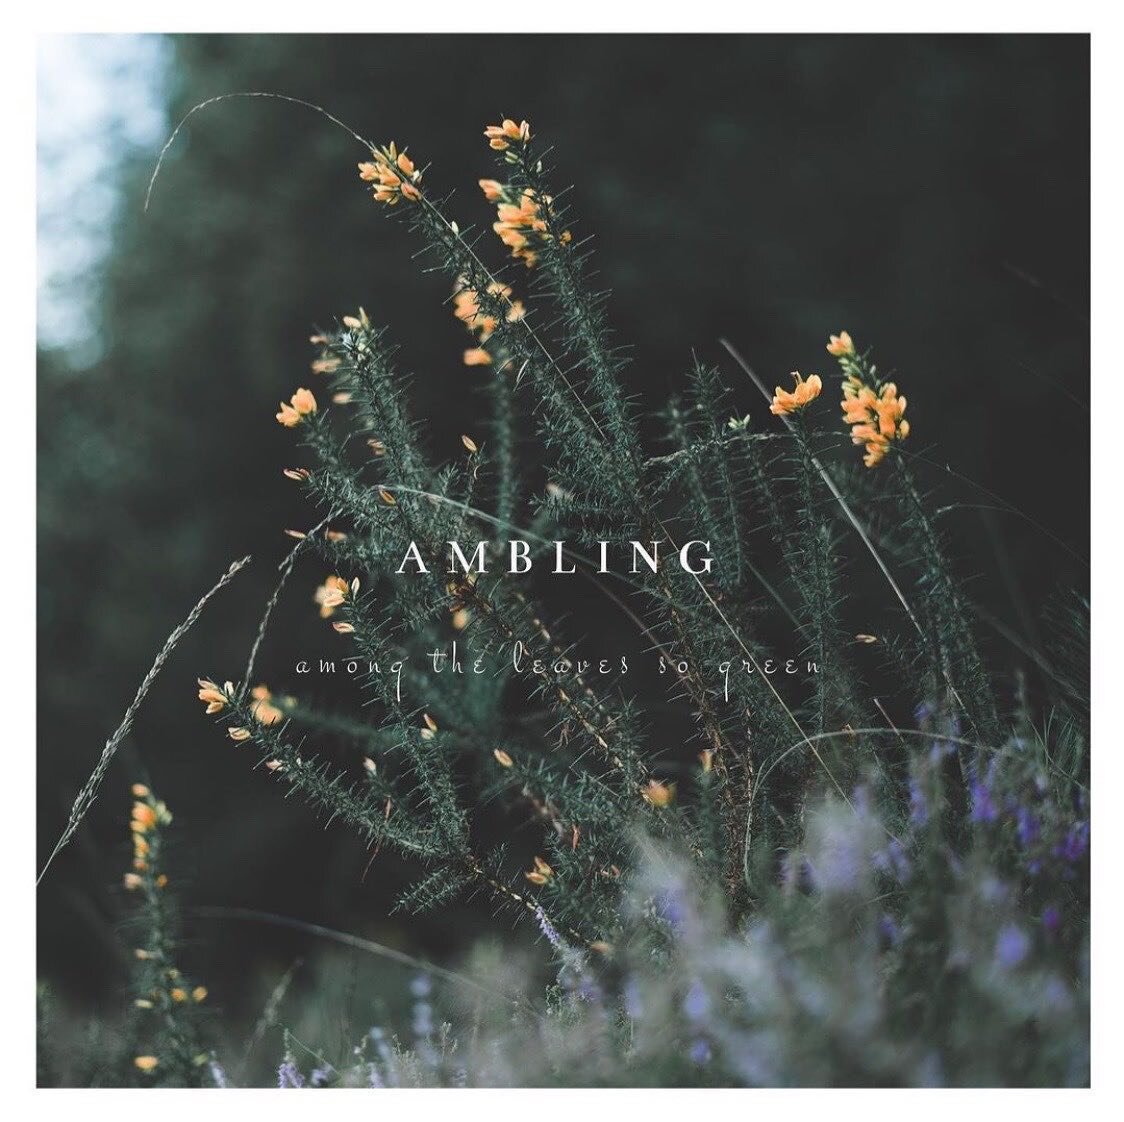 Christmas music isn&rsquo;t for everybody (absolutely massive understatement), but it&rsquo;s definitely for me. Every year, I try to bring something fresh into my rotation, and this new EP from @sarahgmccoy (Ambling) is really doing it for me right 